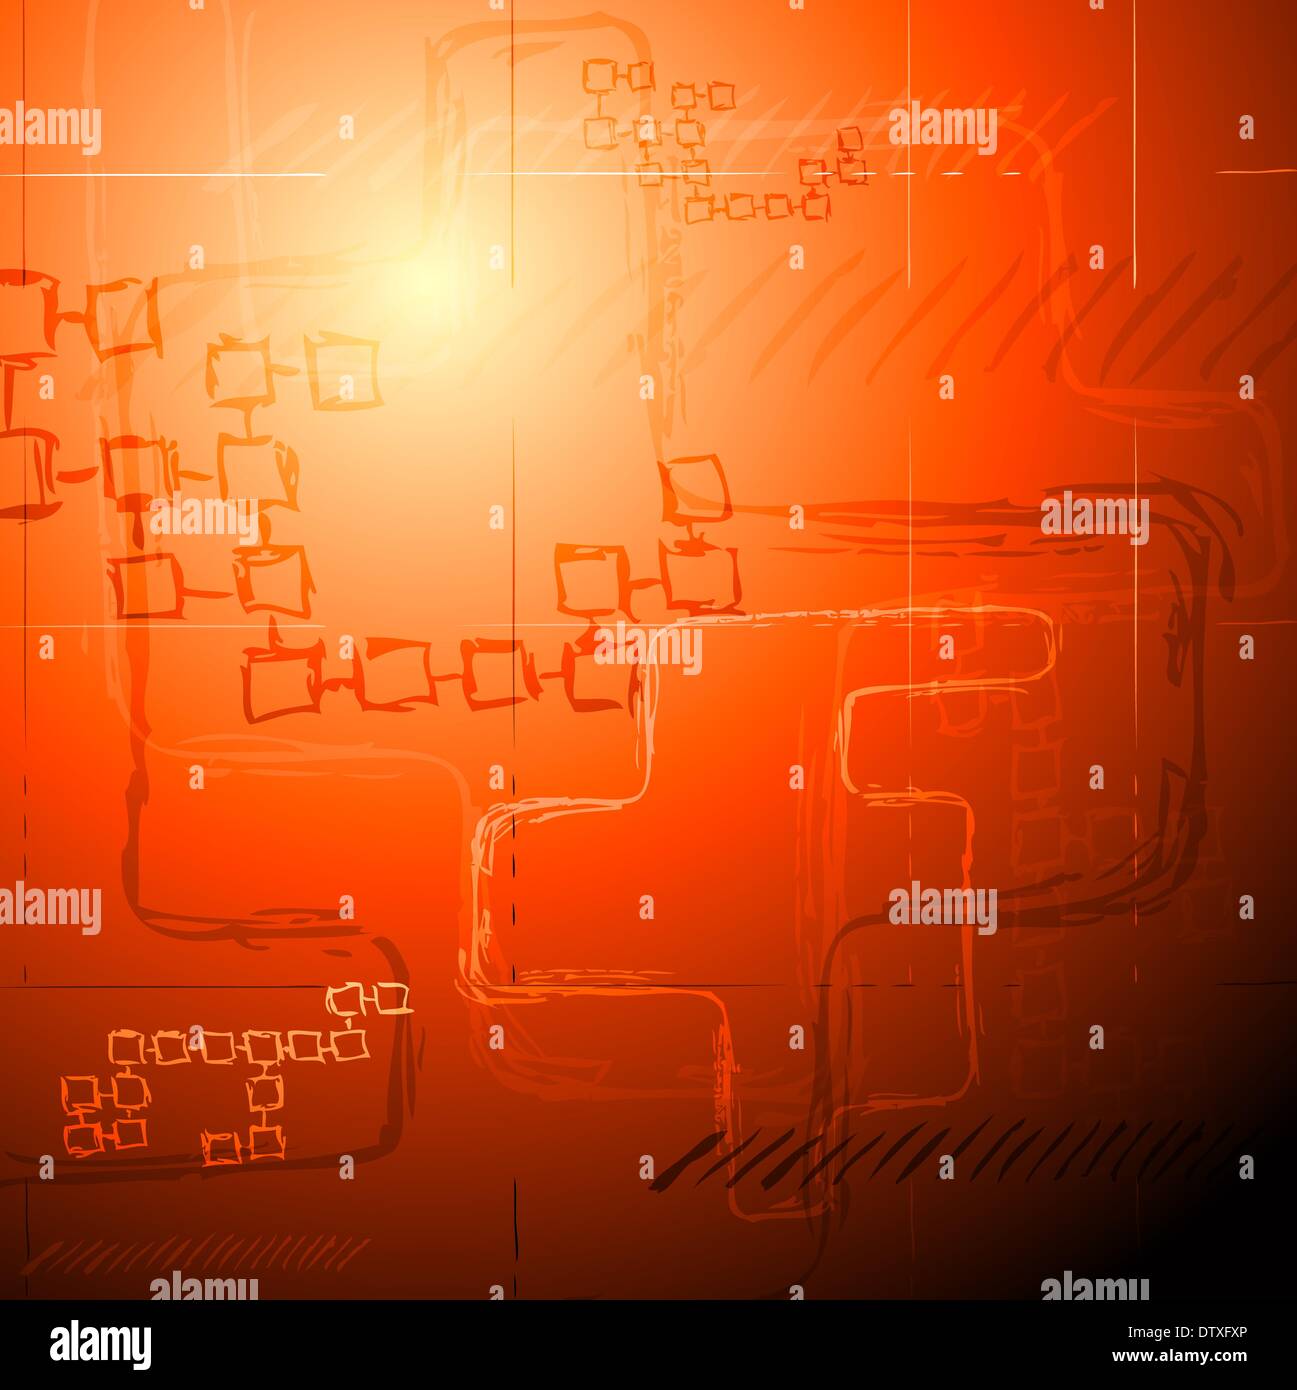 Concept orange technical drawing Stock Photo